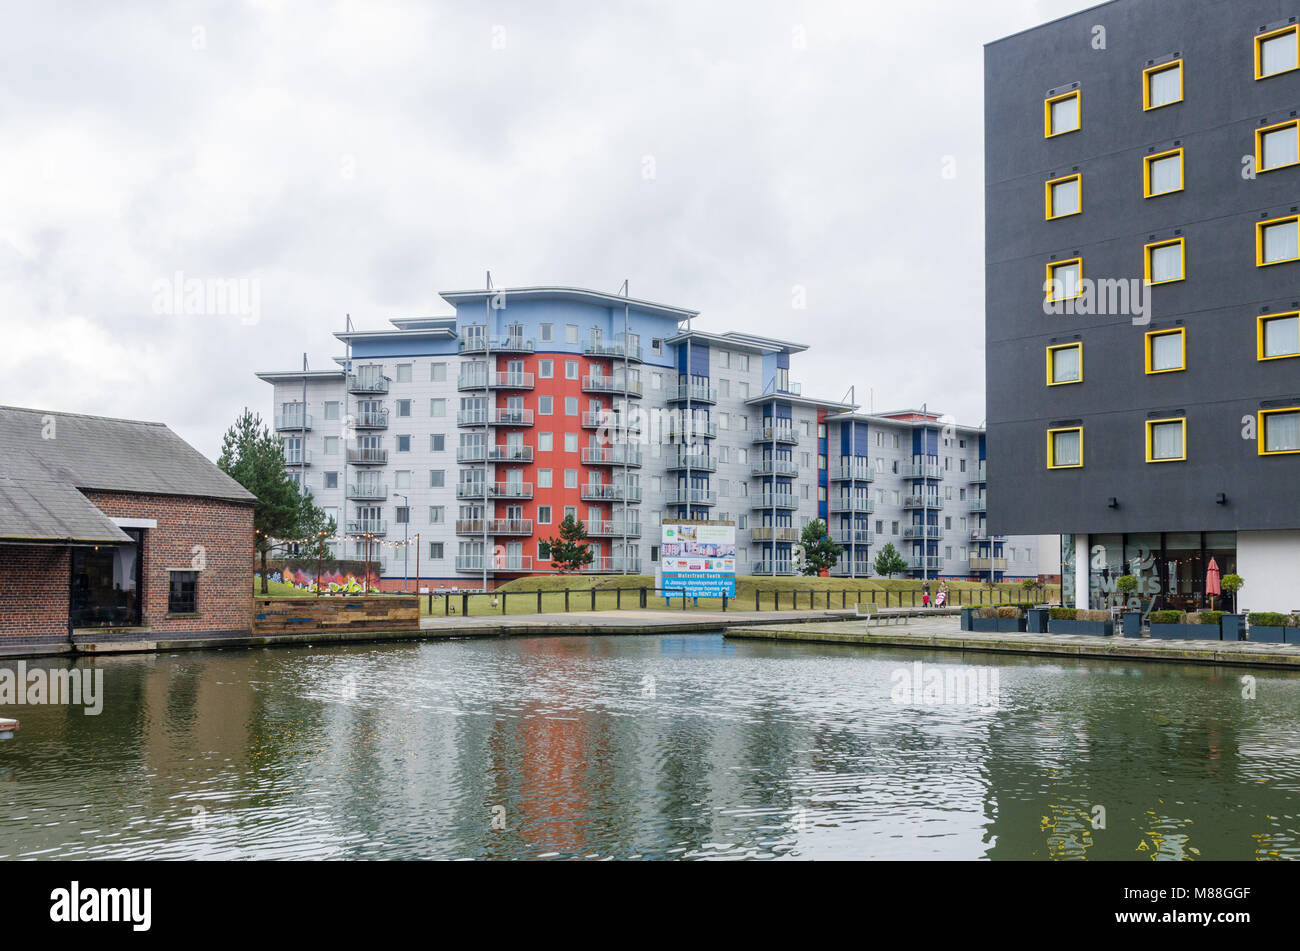 Modern canalside apartments in the West Midlands industrial town of Walsall Stock Photo